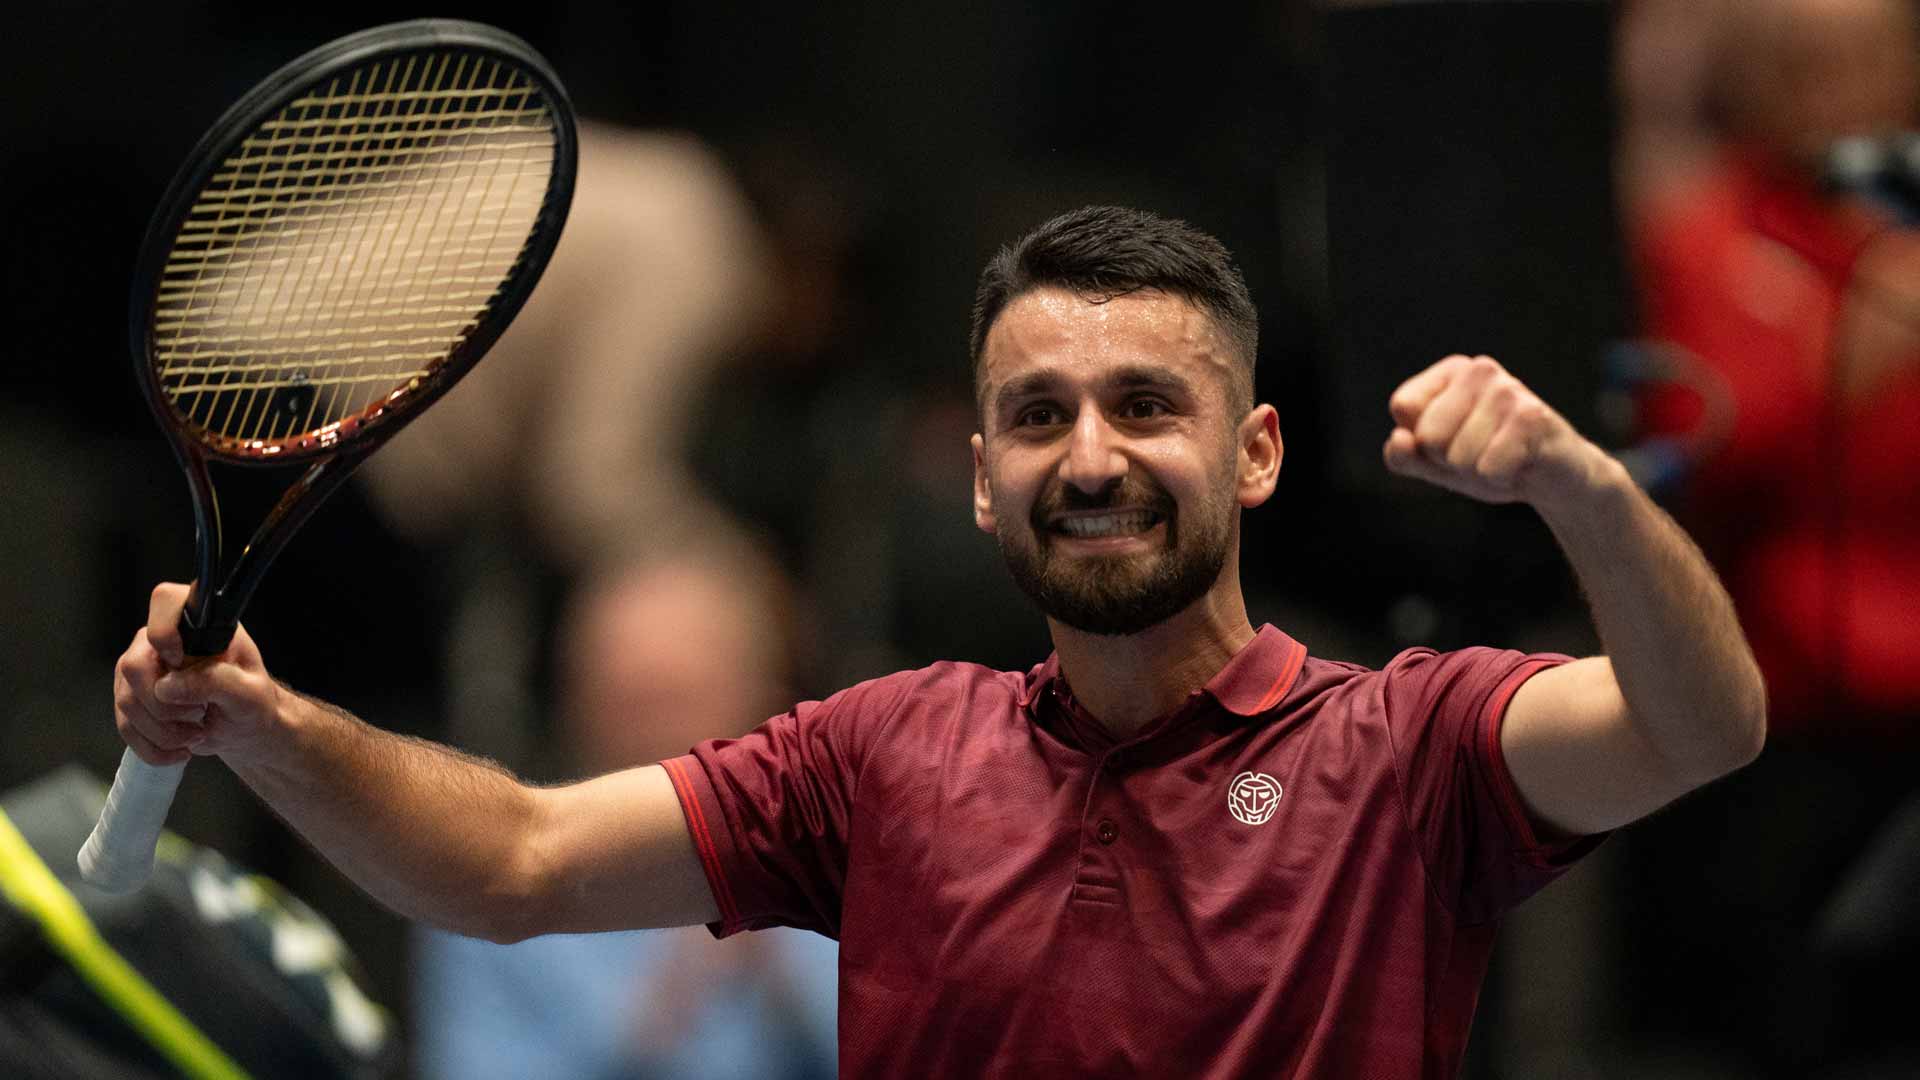 Hazem Naw celebrates securing his place in the Koblenz Open semi-finals.